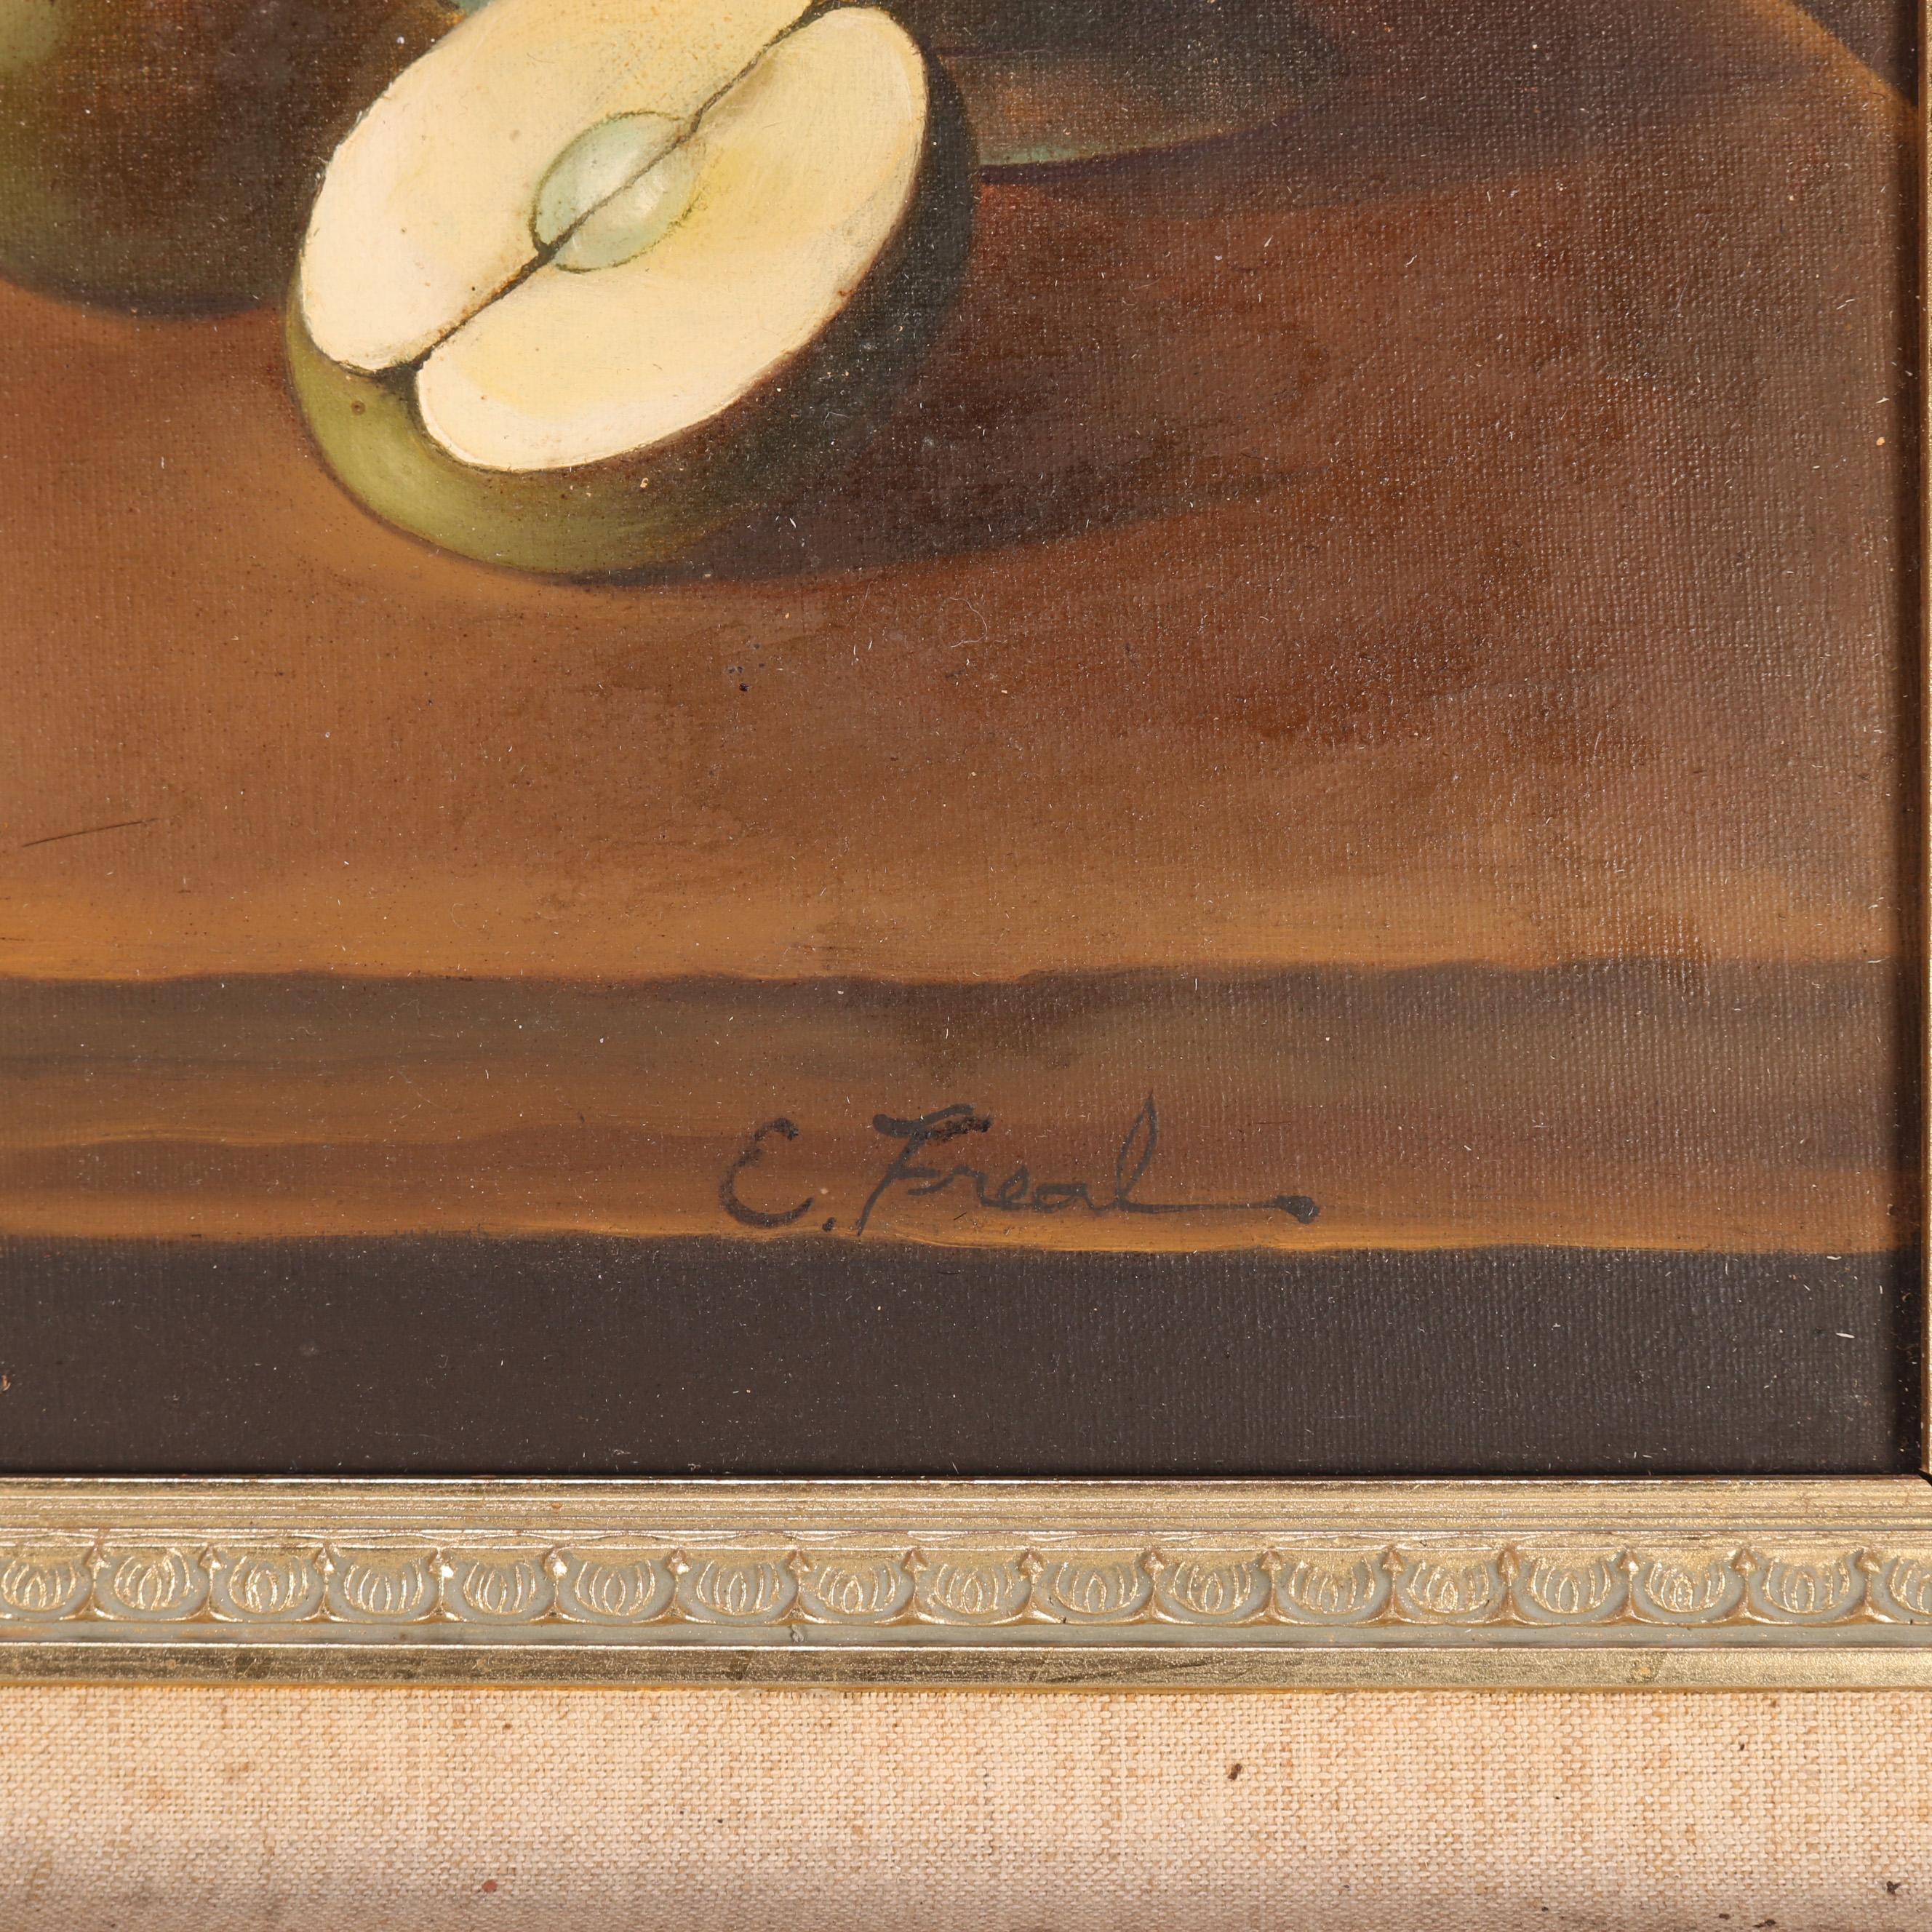 An antique painting depicts fruit still life oil on canvas of pears and apples on table top, artist signed lower right as photographed, seated in giltwood frame, circa 1920

Measures: 21